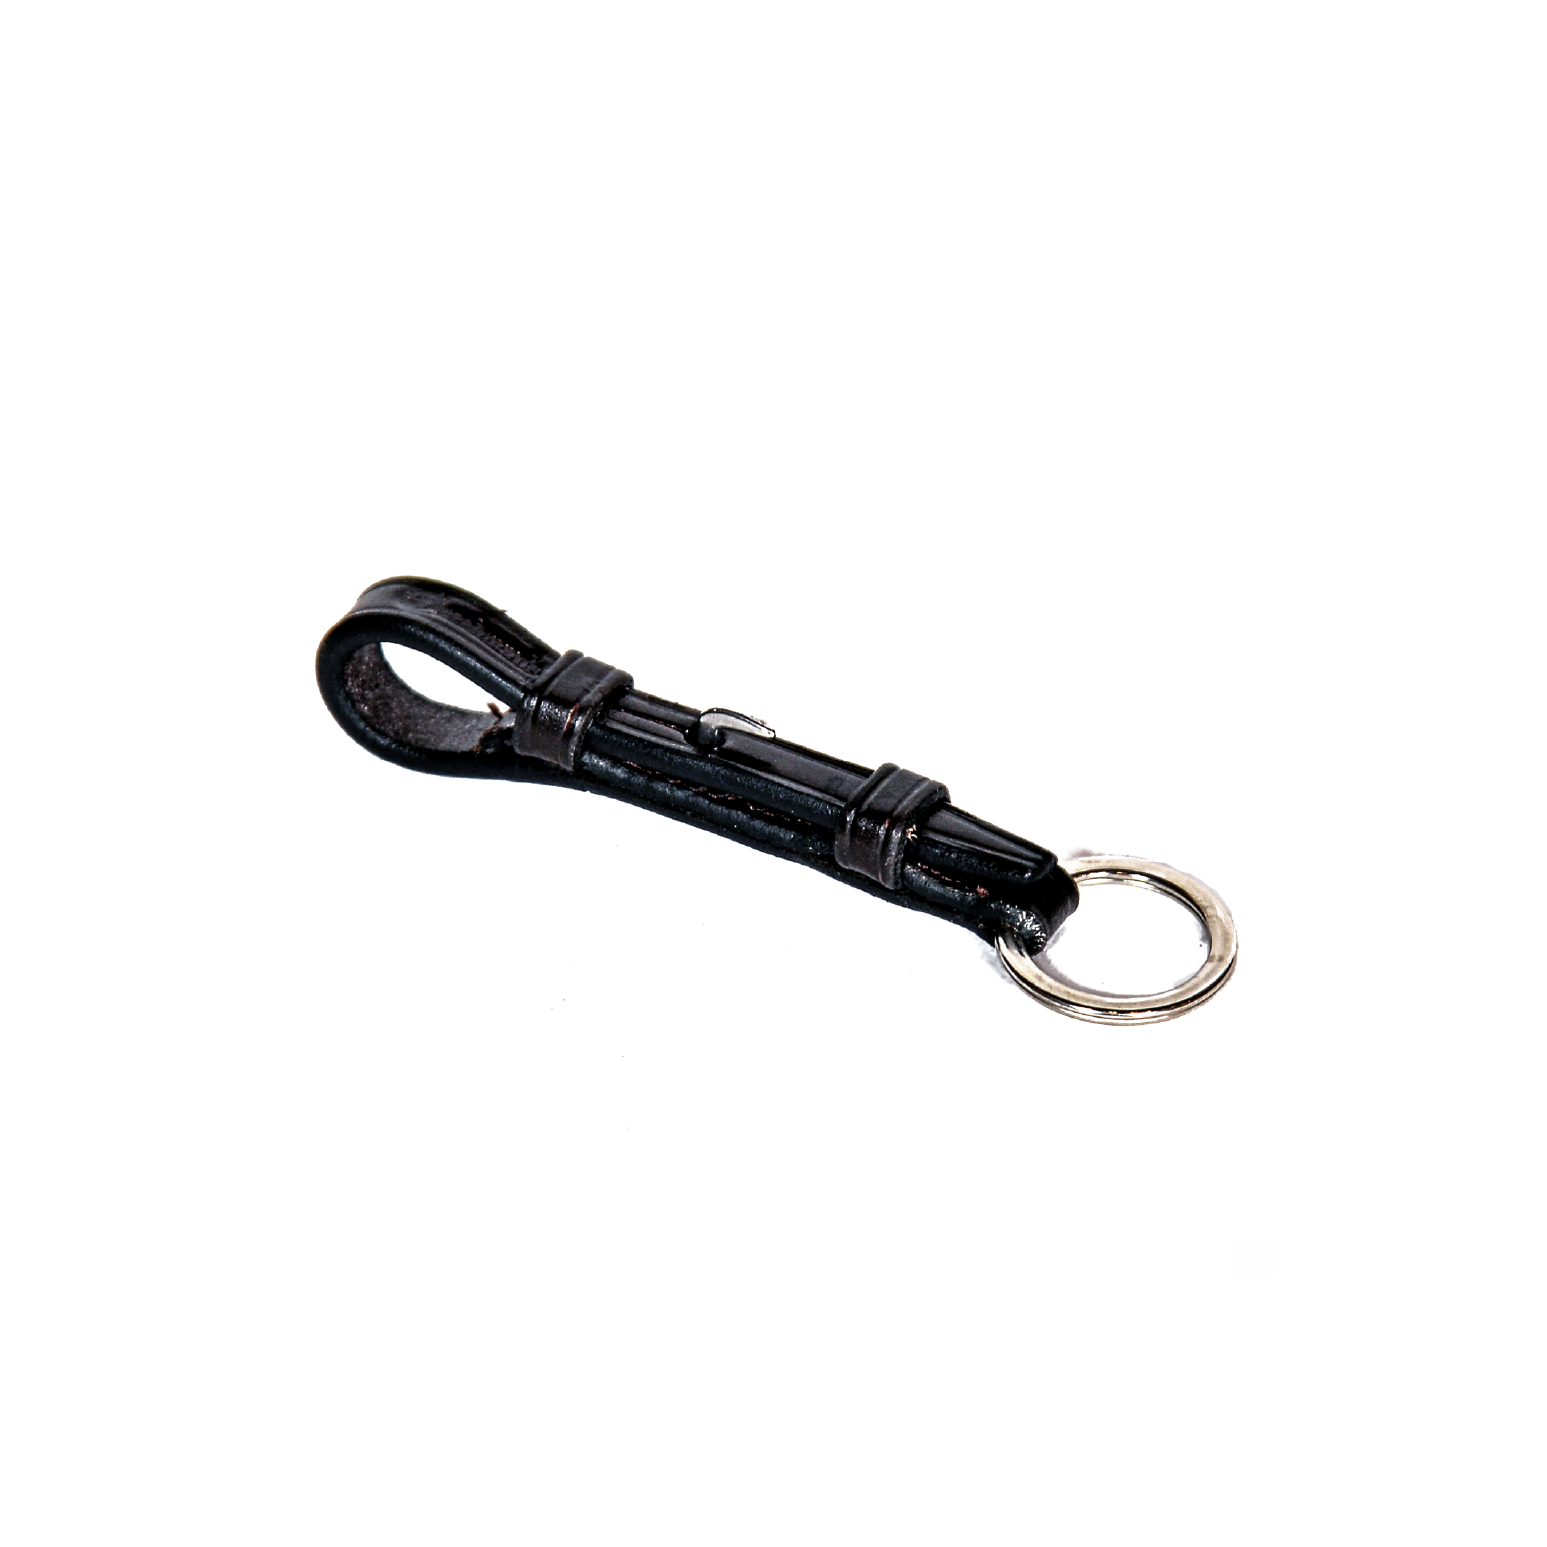 Key Clip, Carabiner Keychain with Key Ring